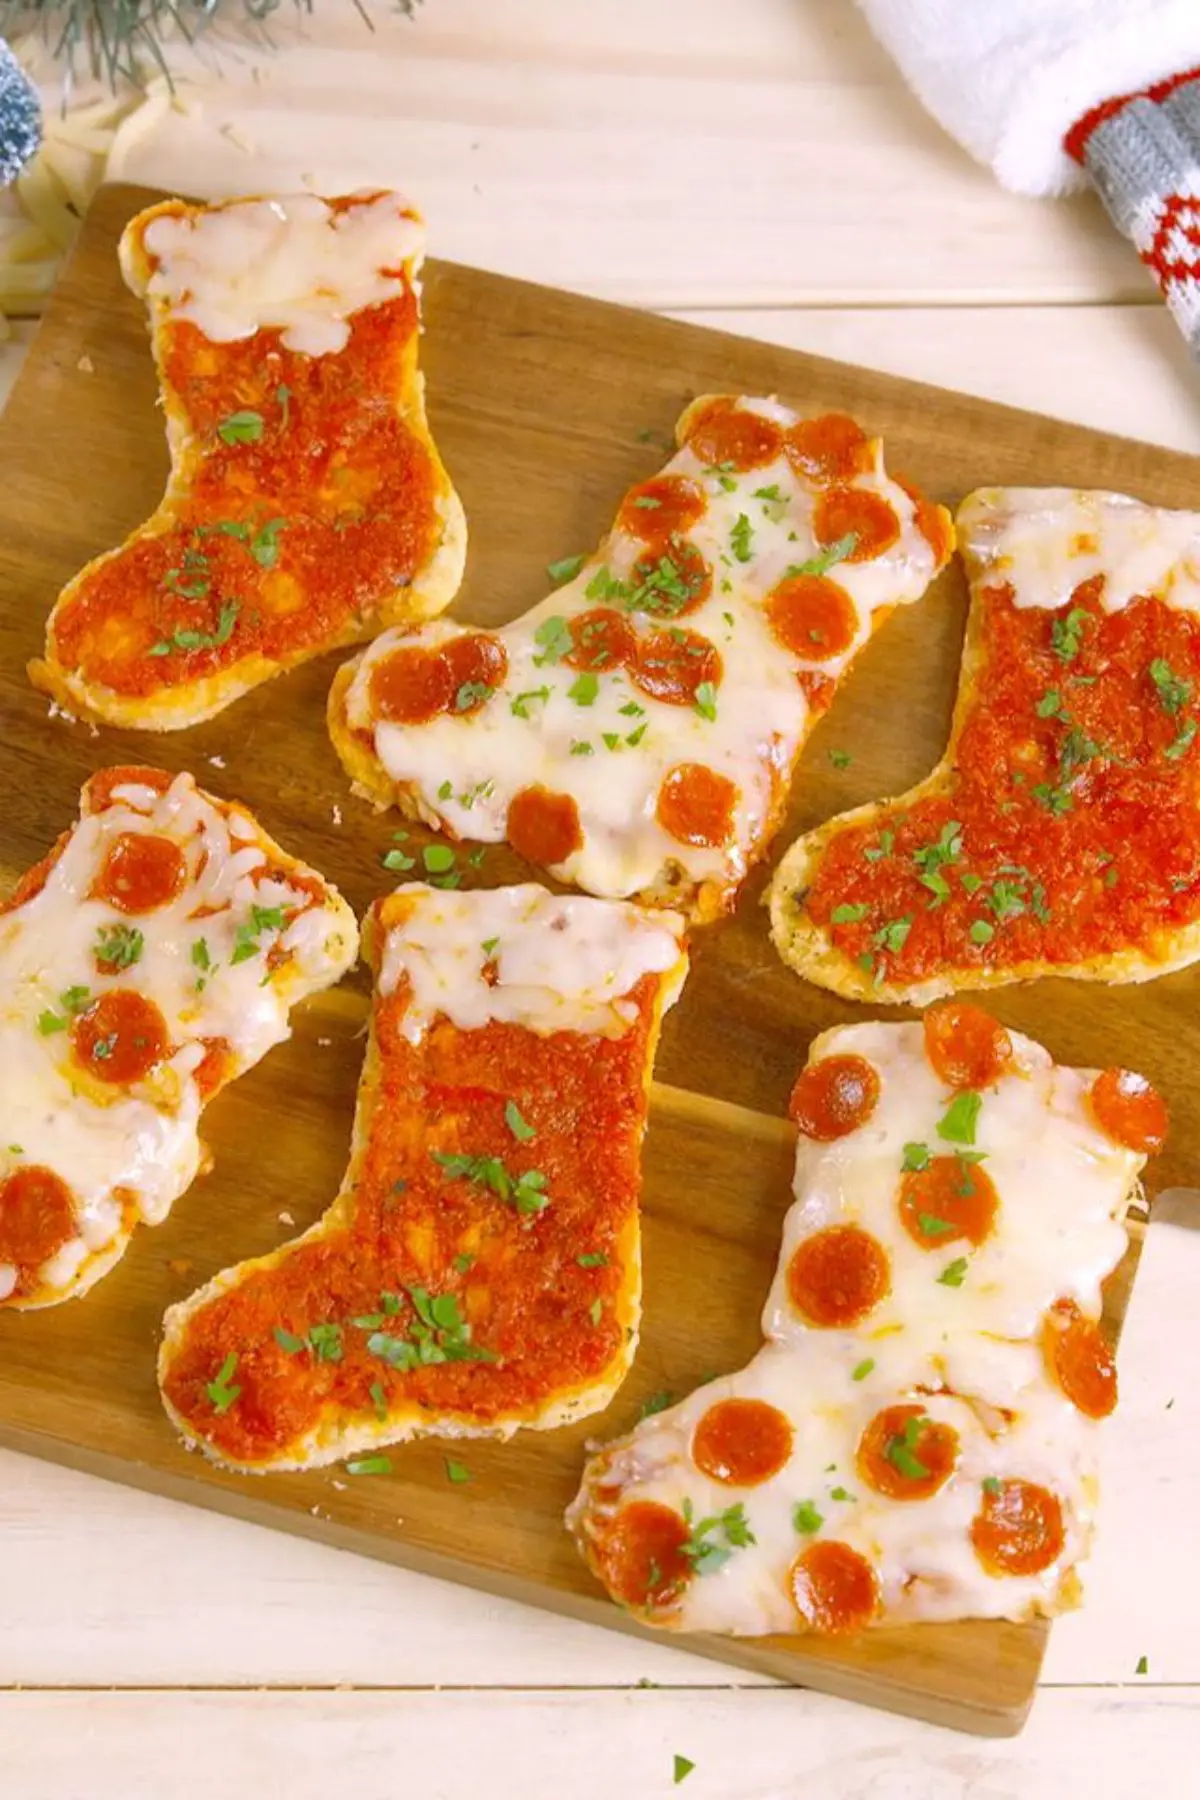 Pizzas in the shape of Christmas stockings